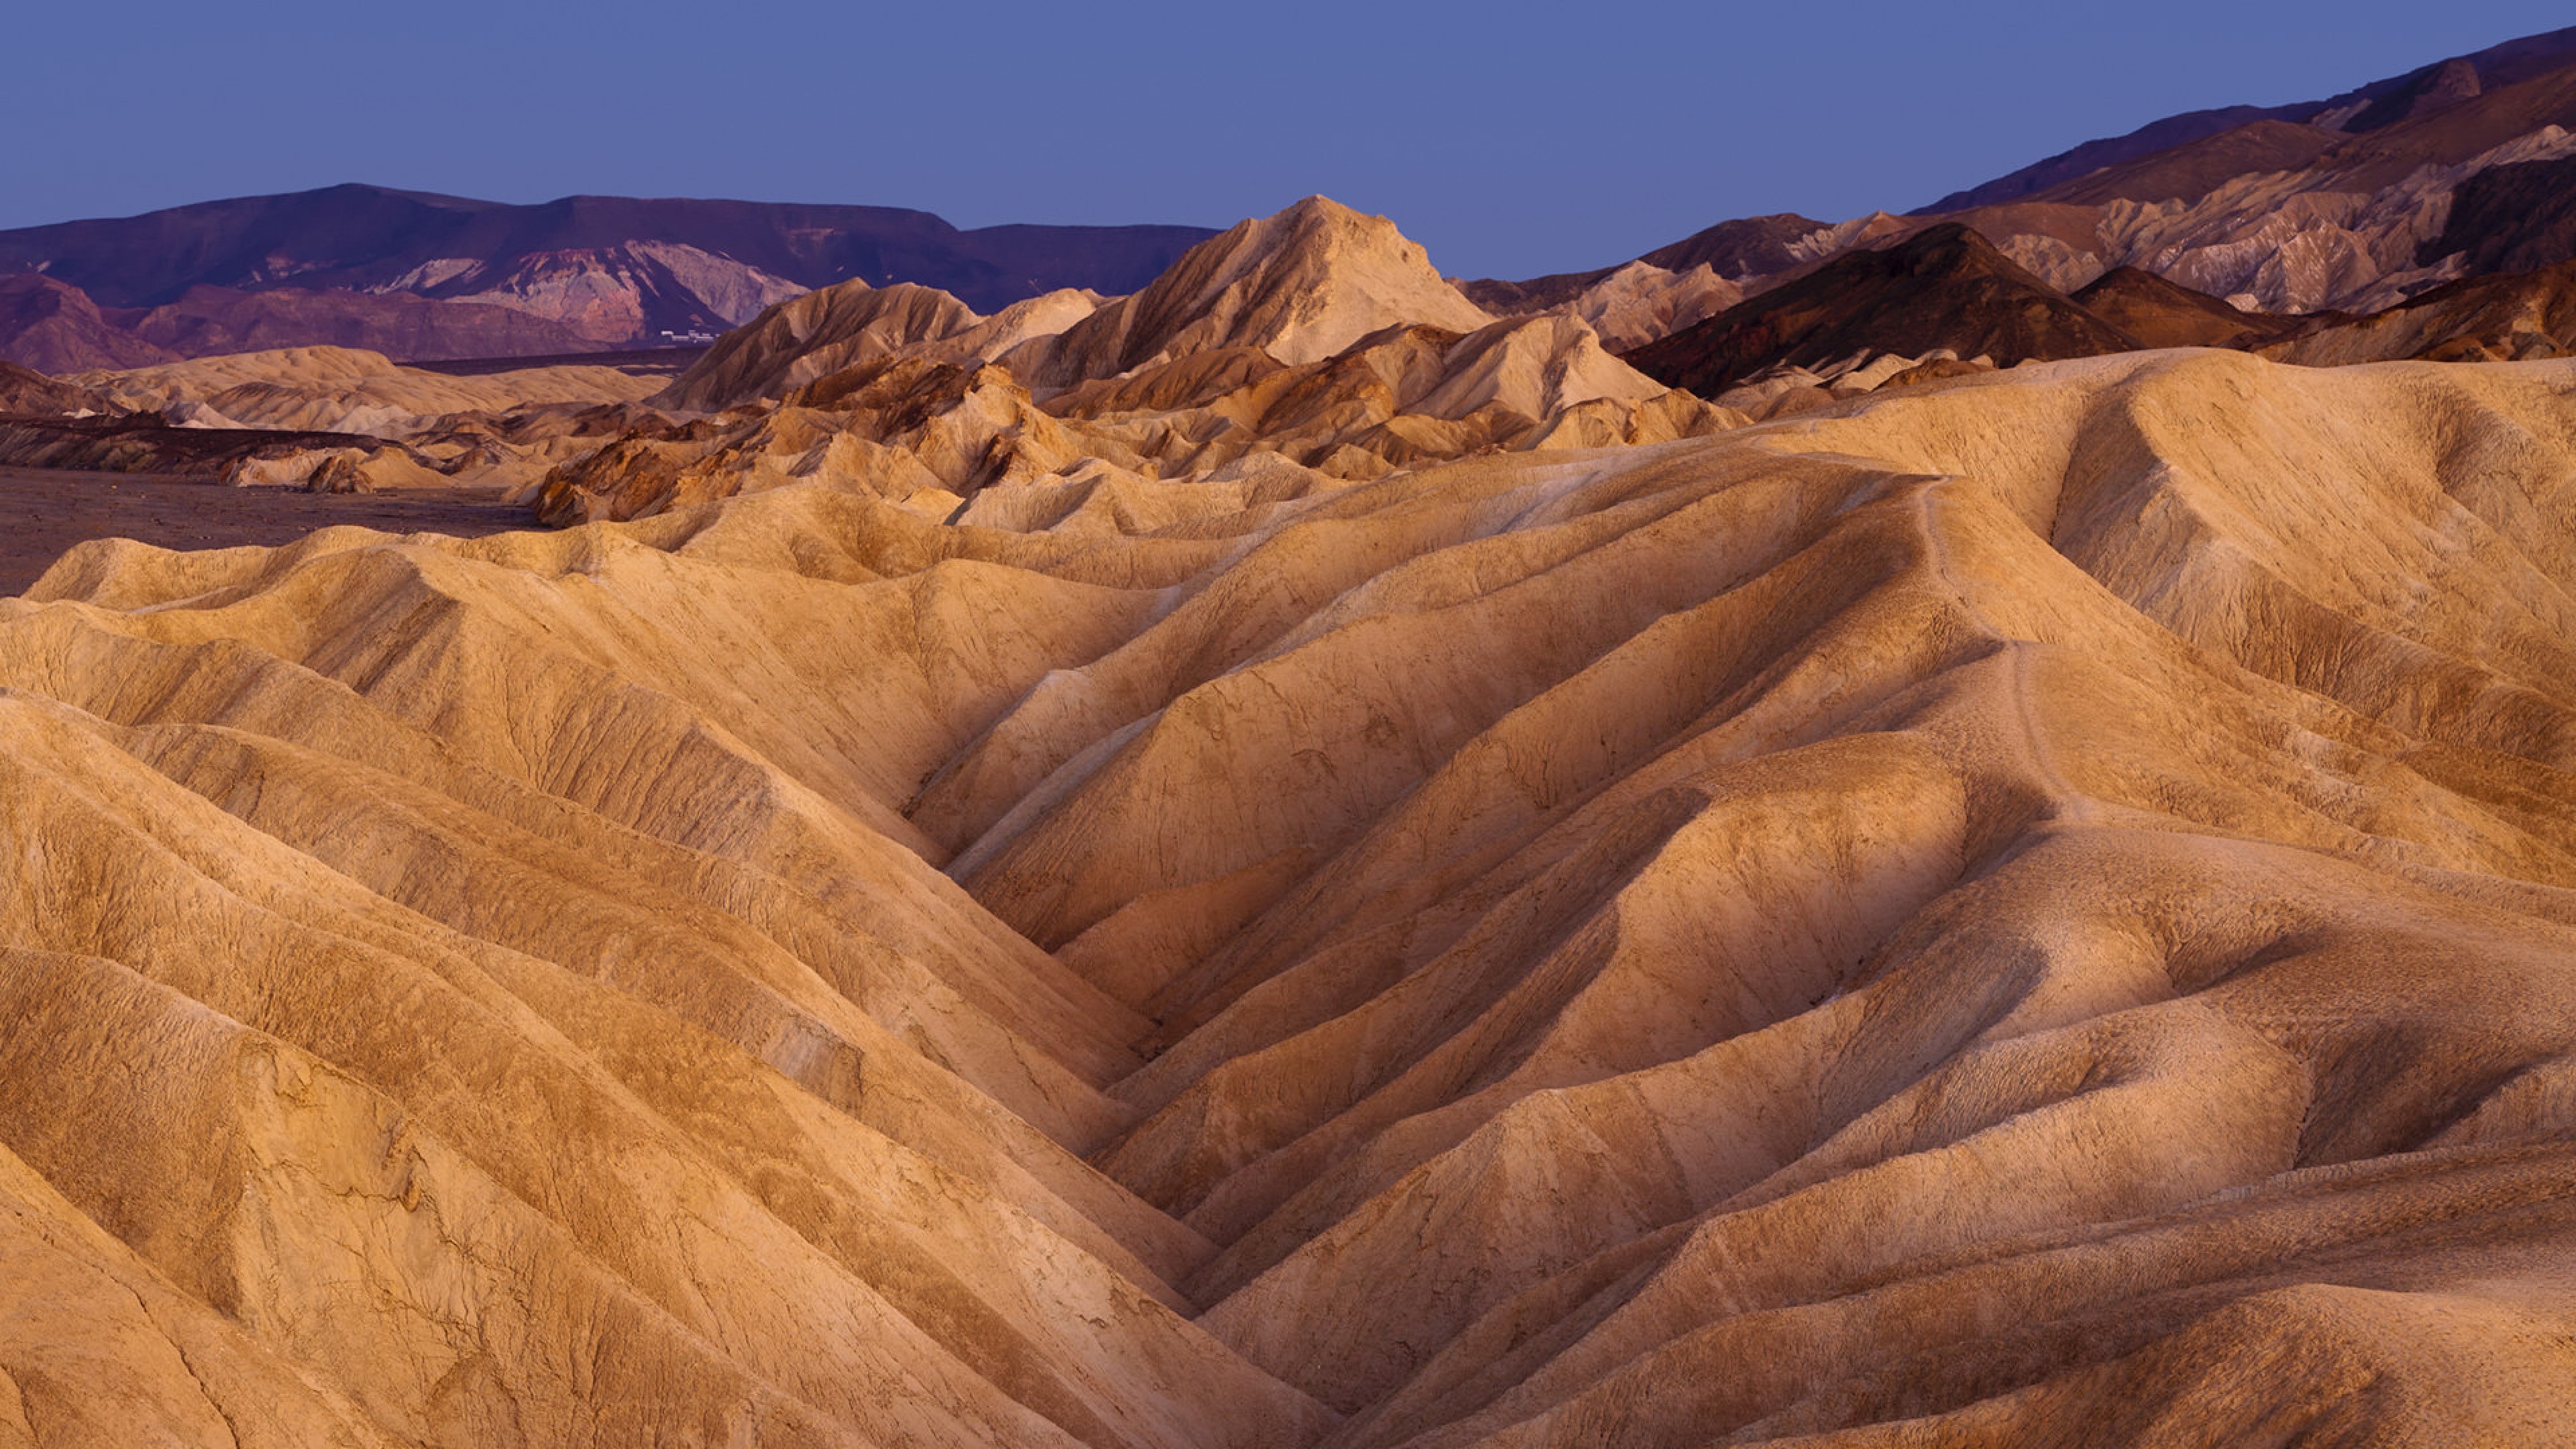 Death Valley Wallpapers, Earth HQ Pictures, 3840x2160 4K Desktop